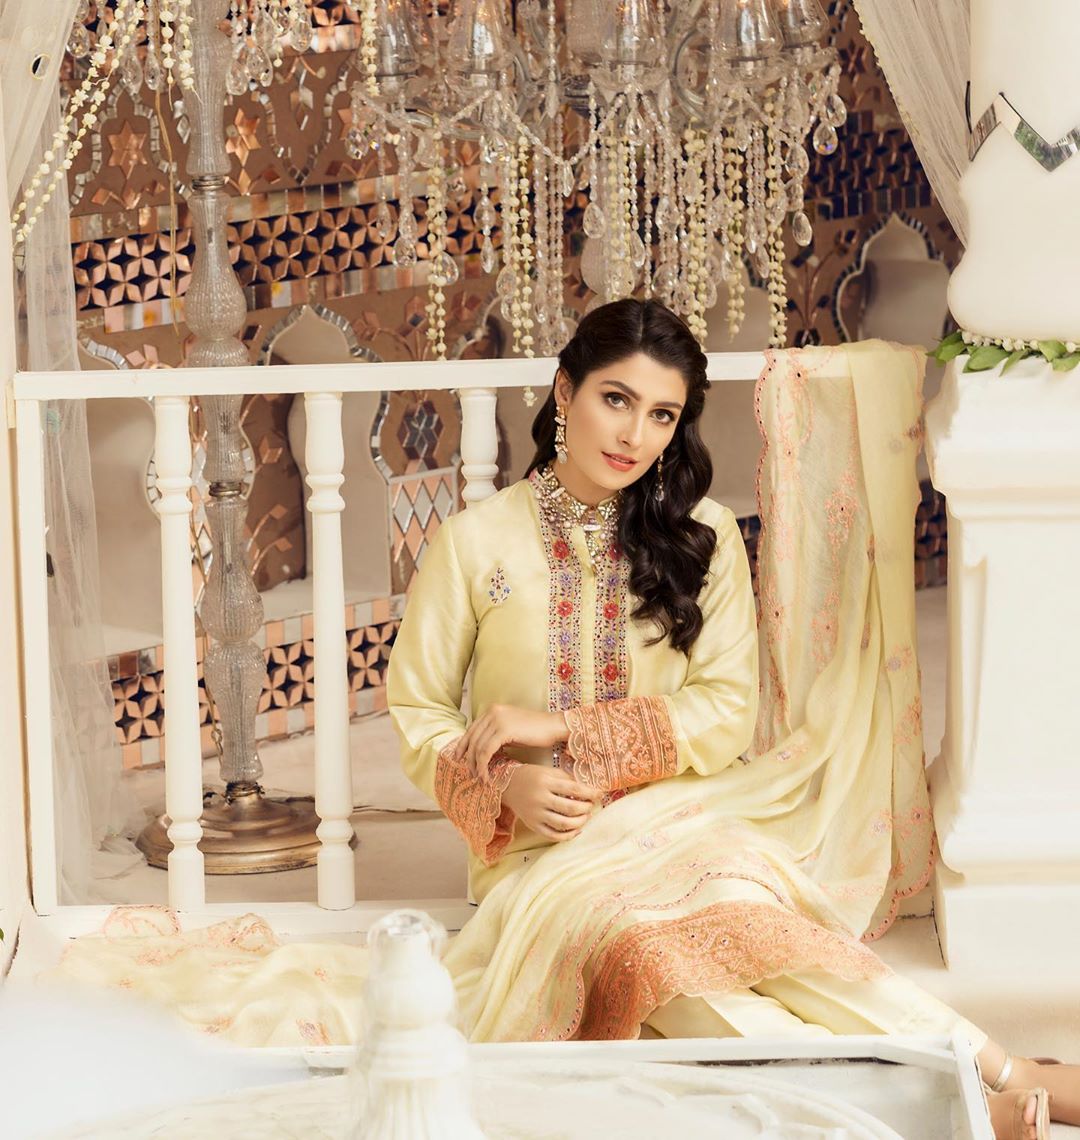 Ayeza Khan Looking Gorgeous in These Beautiful Dresses